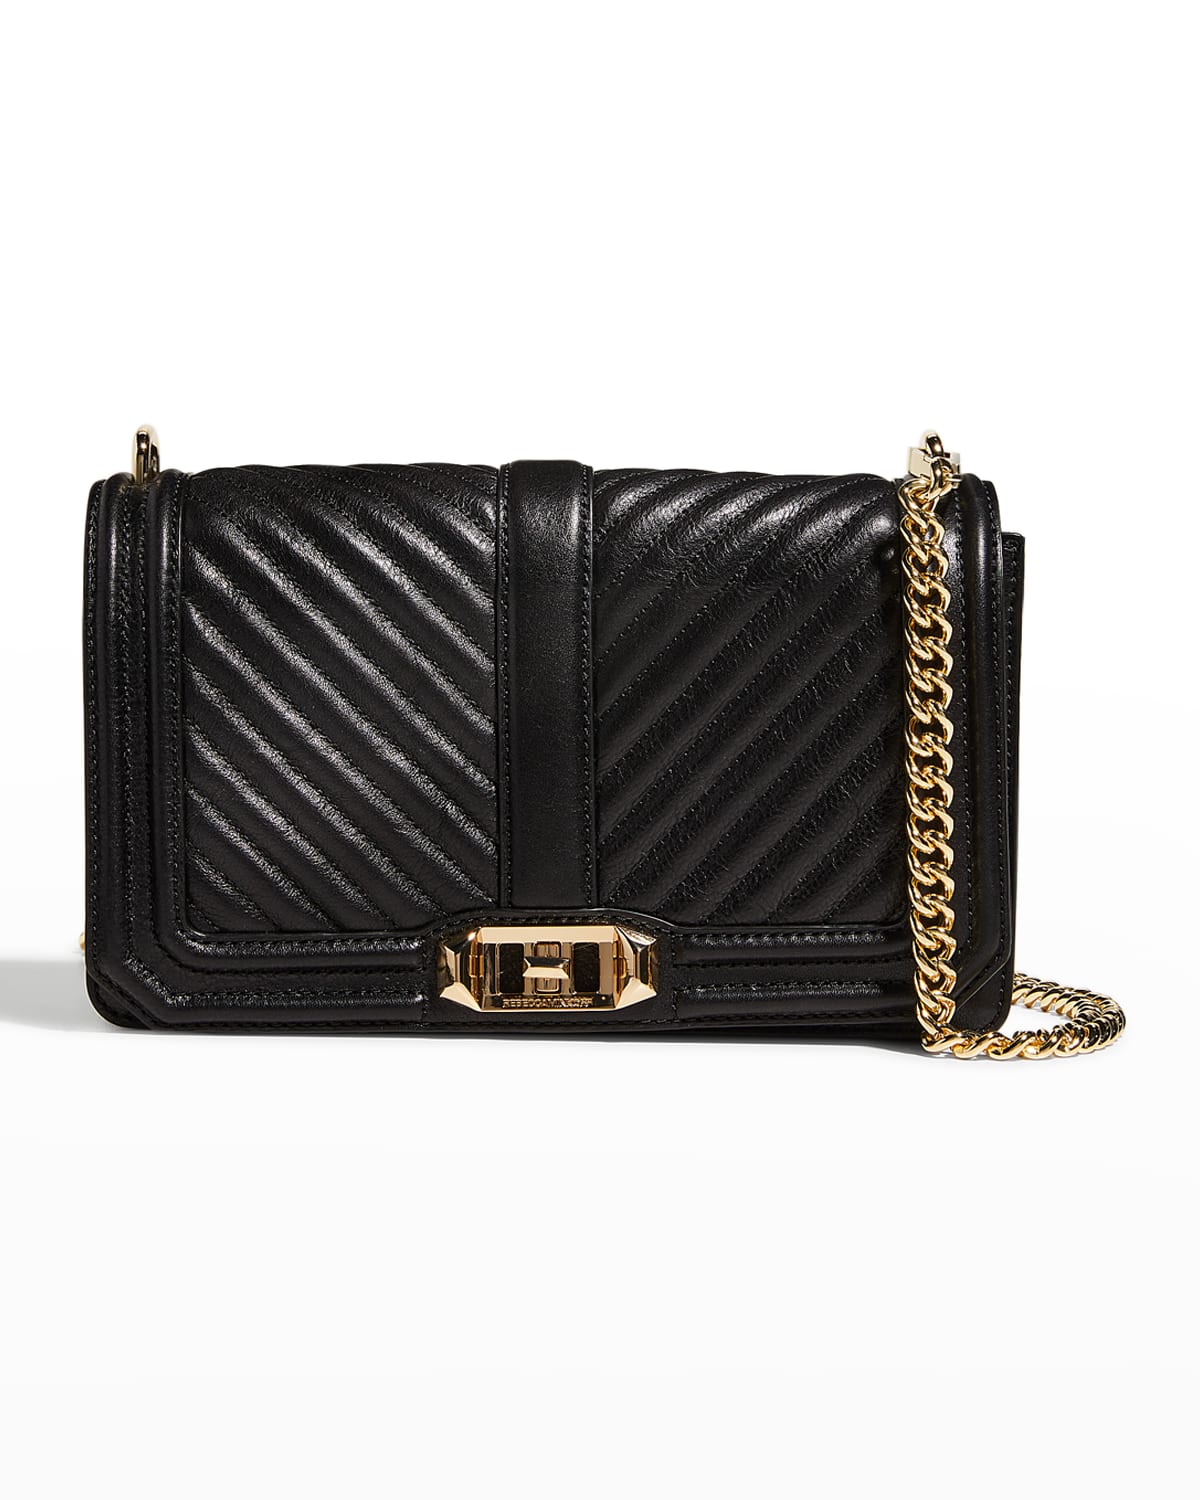 REBECCA MINKOFF LOVE CHEVRON-QUILTED LEATHER CROSSBODY BAG